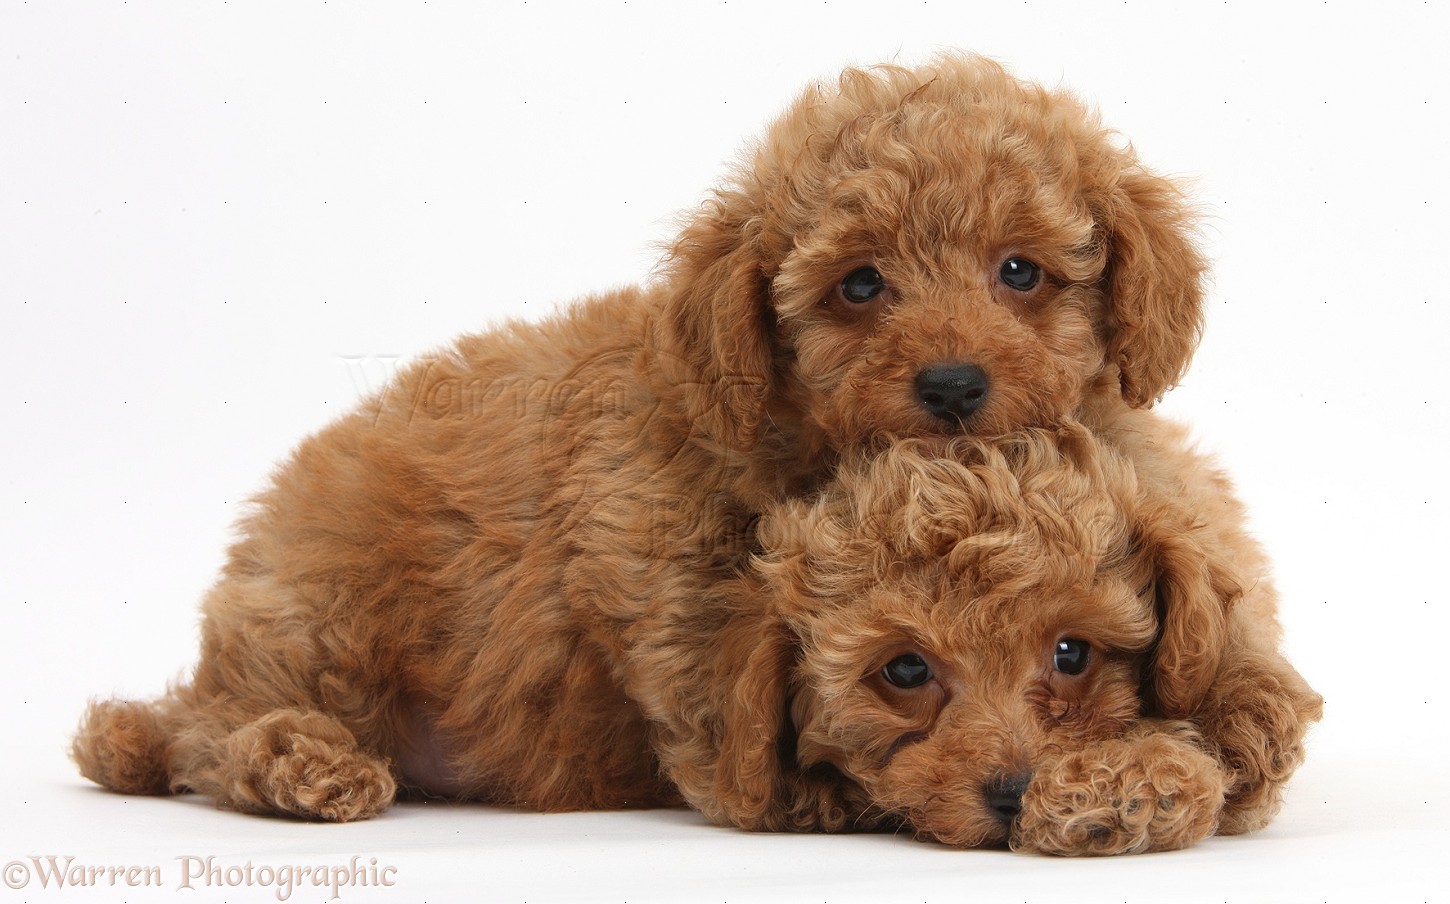 Dogs: Two cute red Toy Poodle puppies photo WP40607